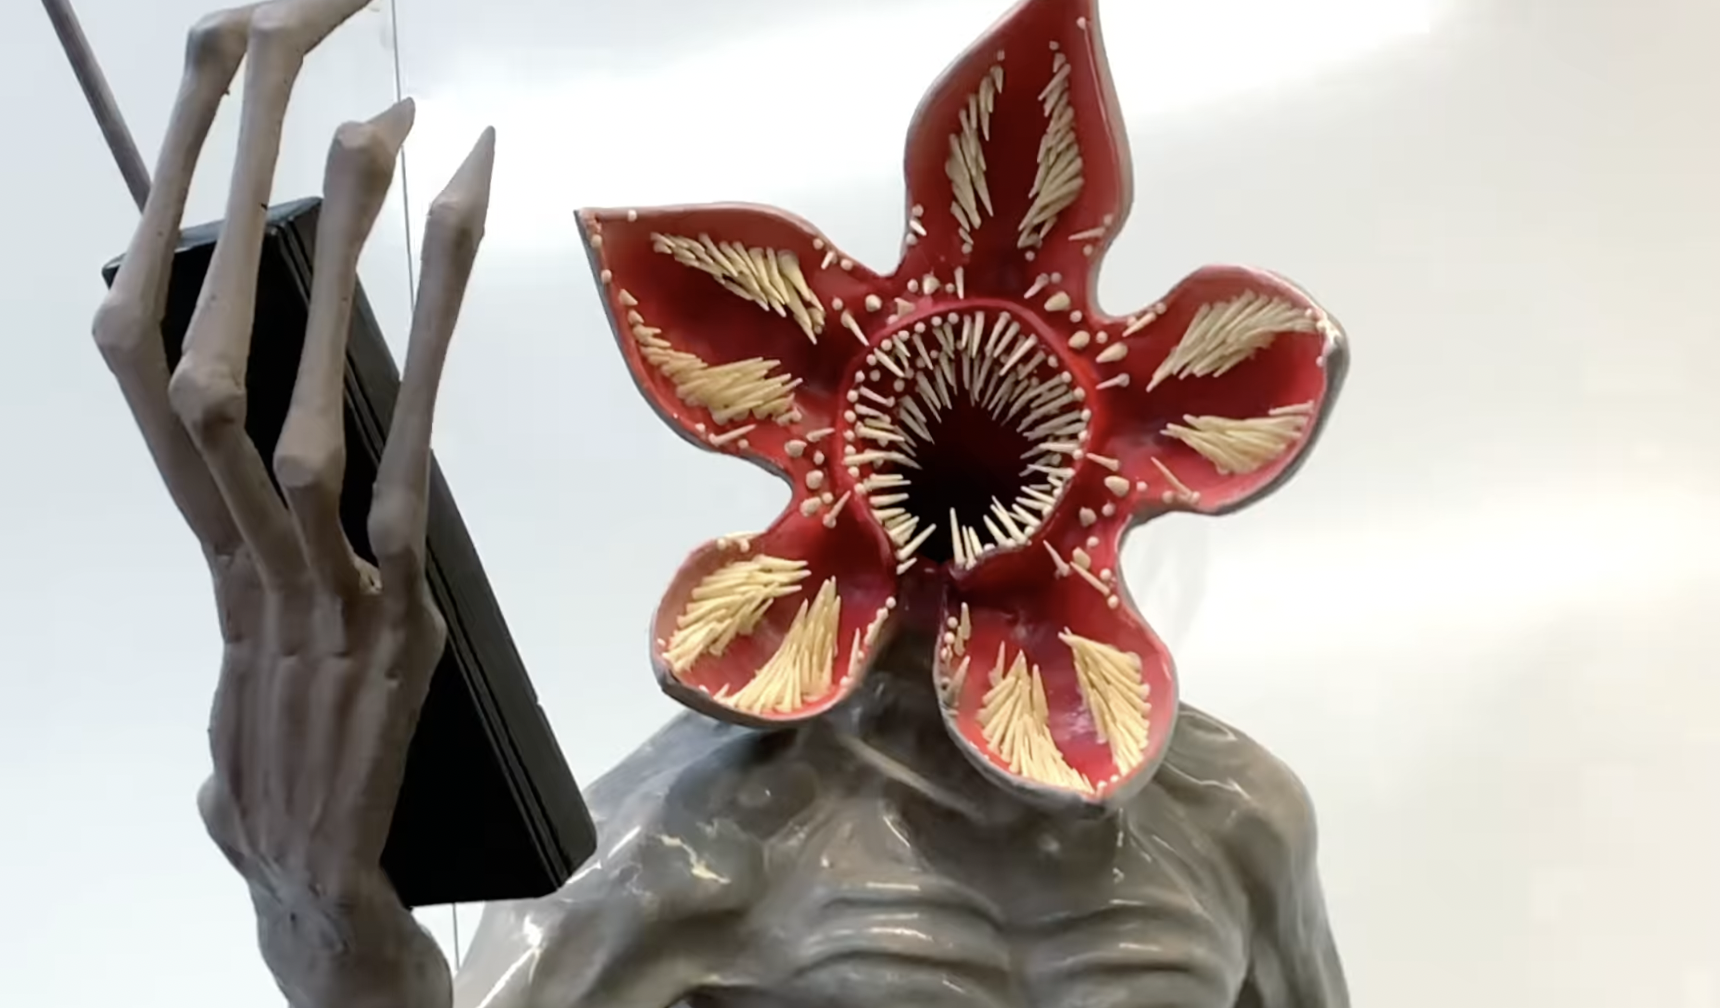 Demogorgon sculpted from chocolate